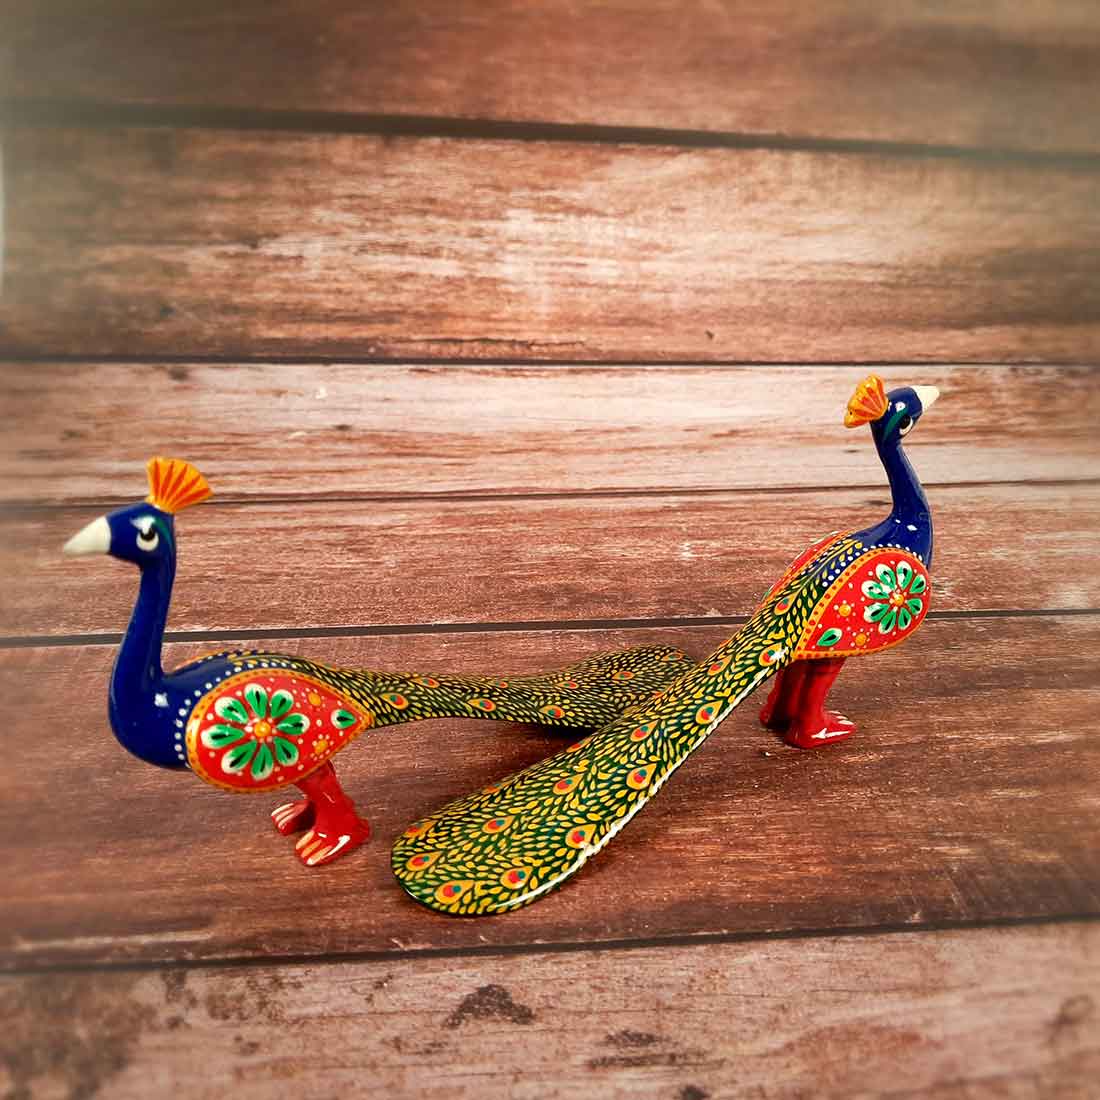 Peacock Figurines For Home Decor & Gifts - 4 Inch -Set of 2 - ApkaMart